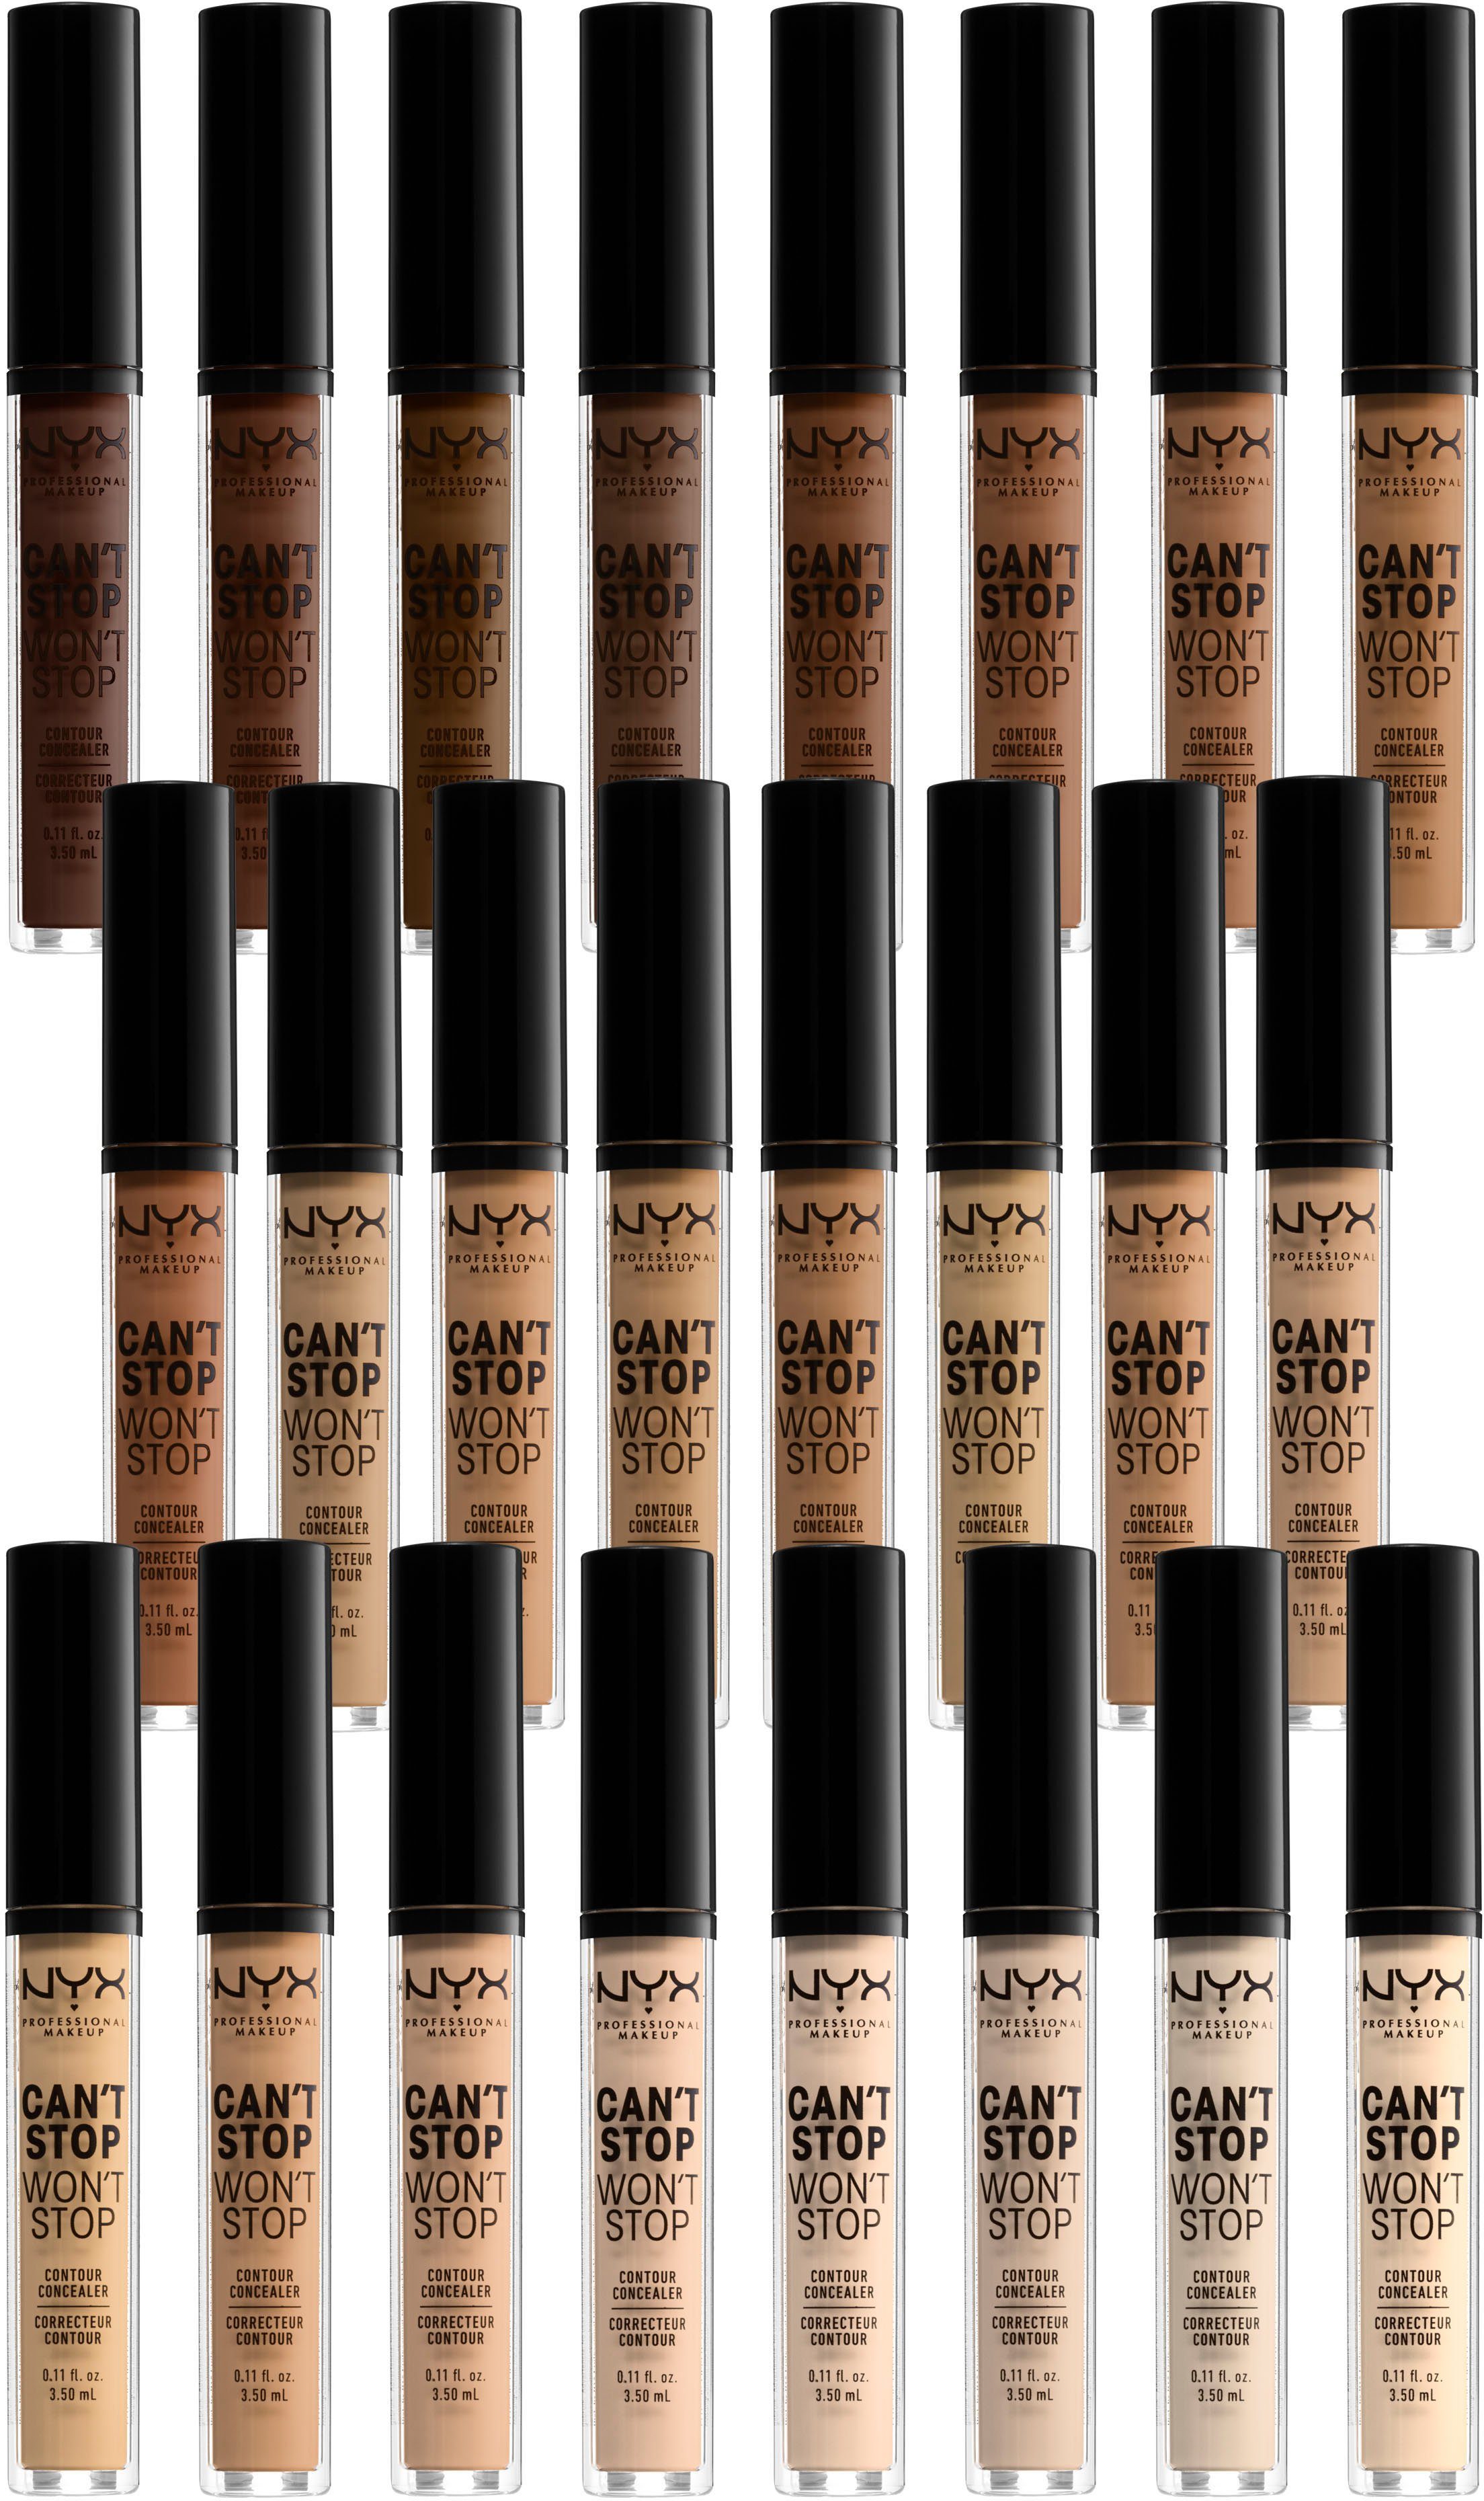 NYX Concealer NYX Stop Concealer Stop Makeup Can´t Alabaster CSWSC02 Won´t Professional